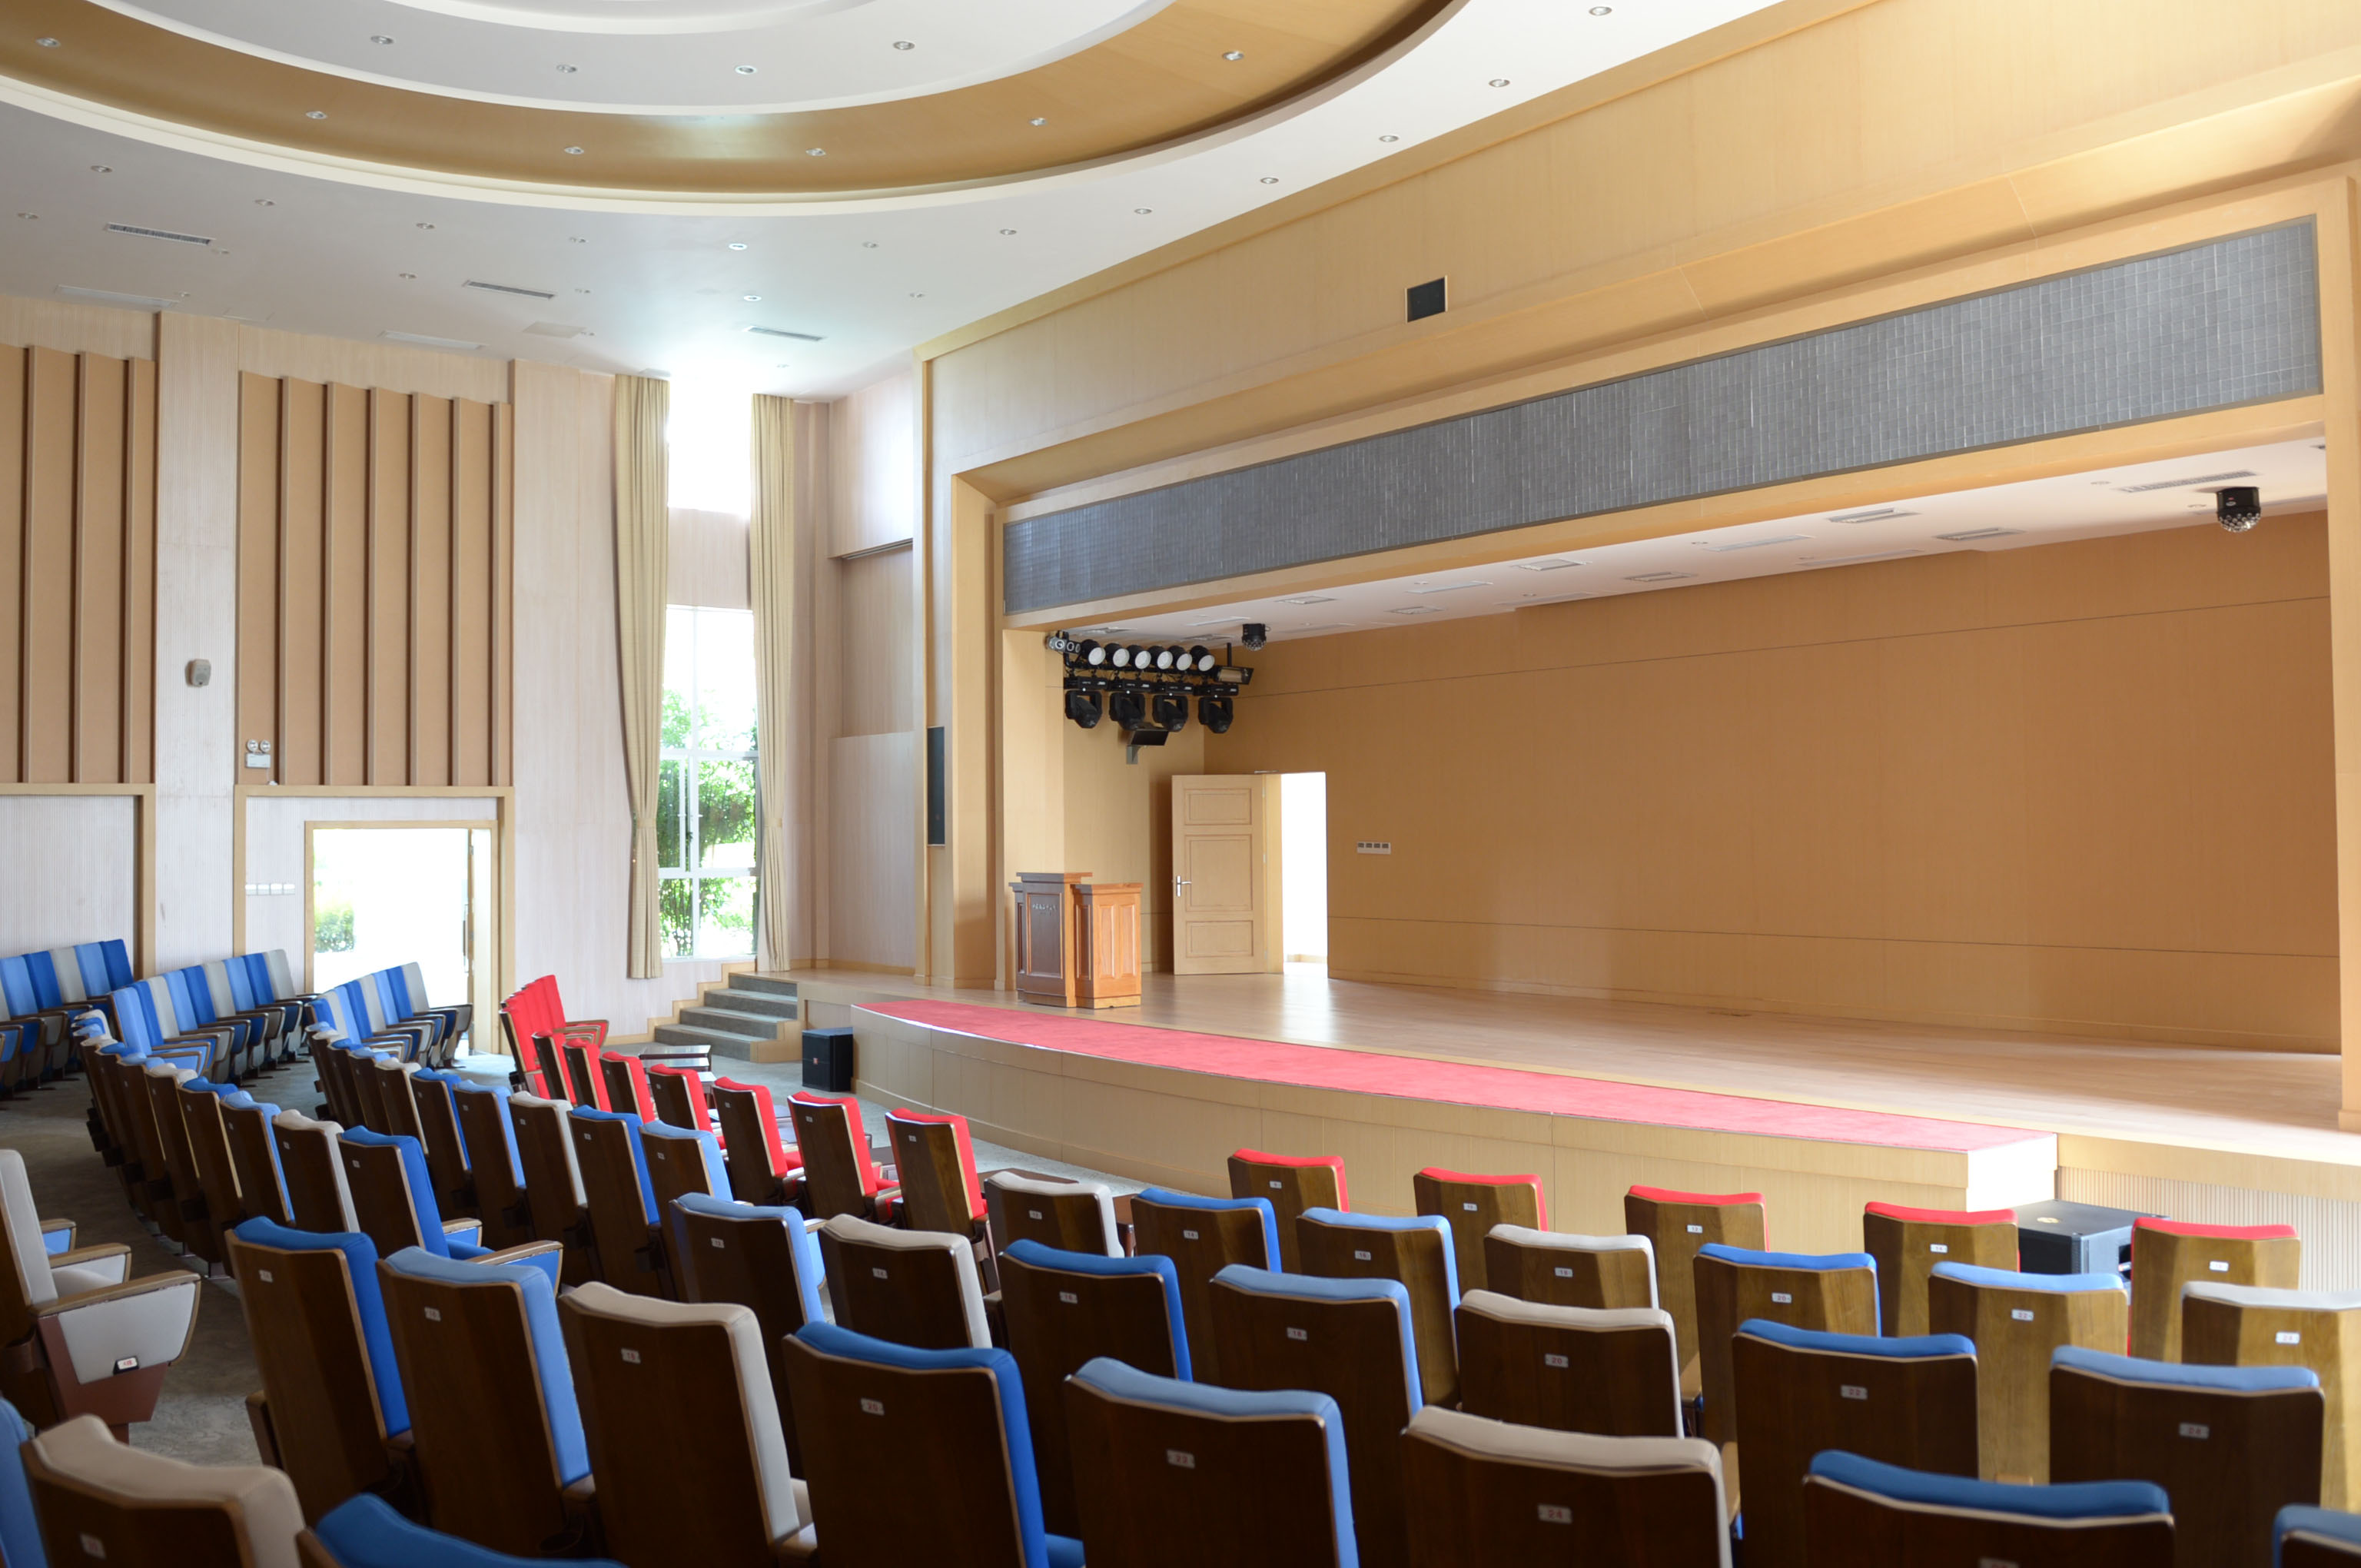 The Grand Lecture Hall